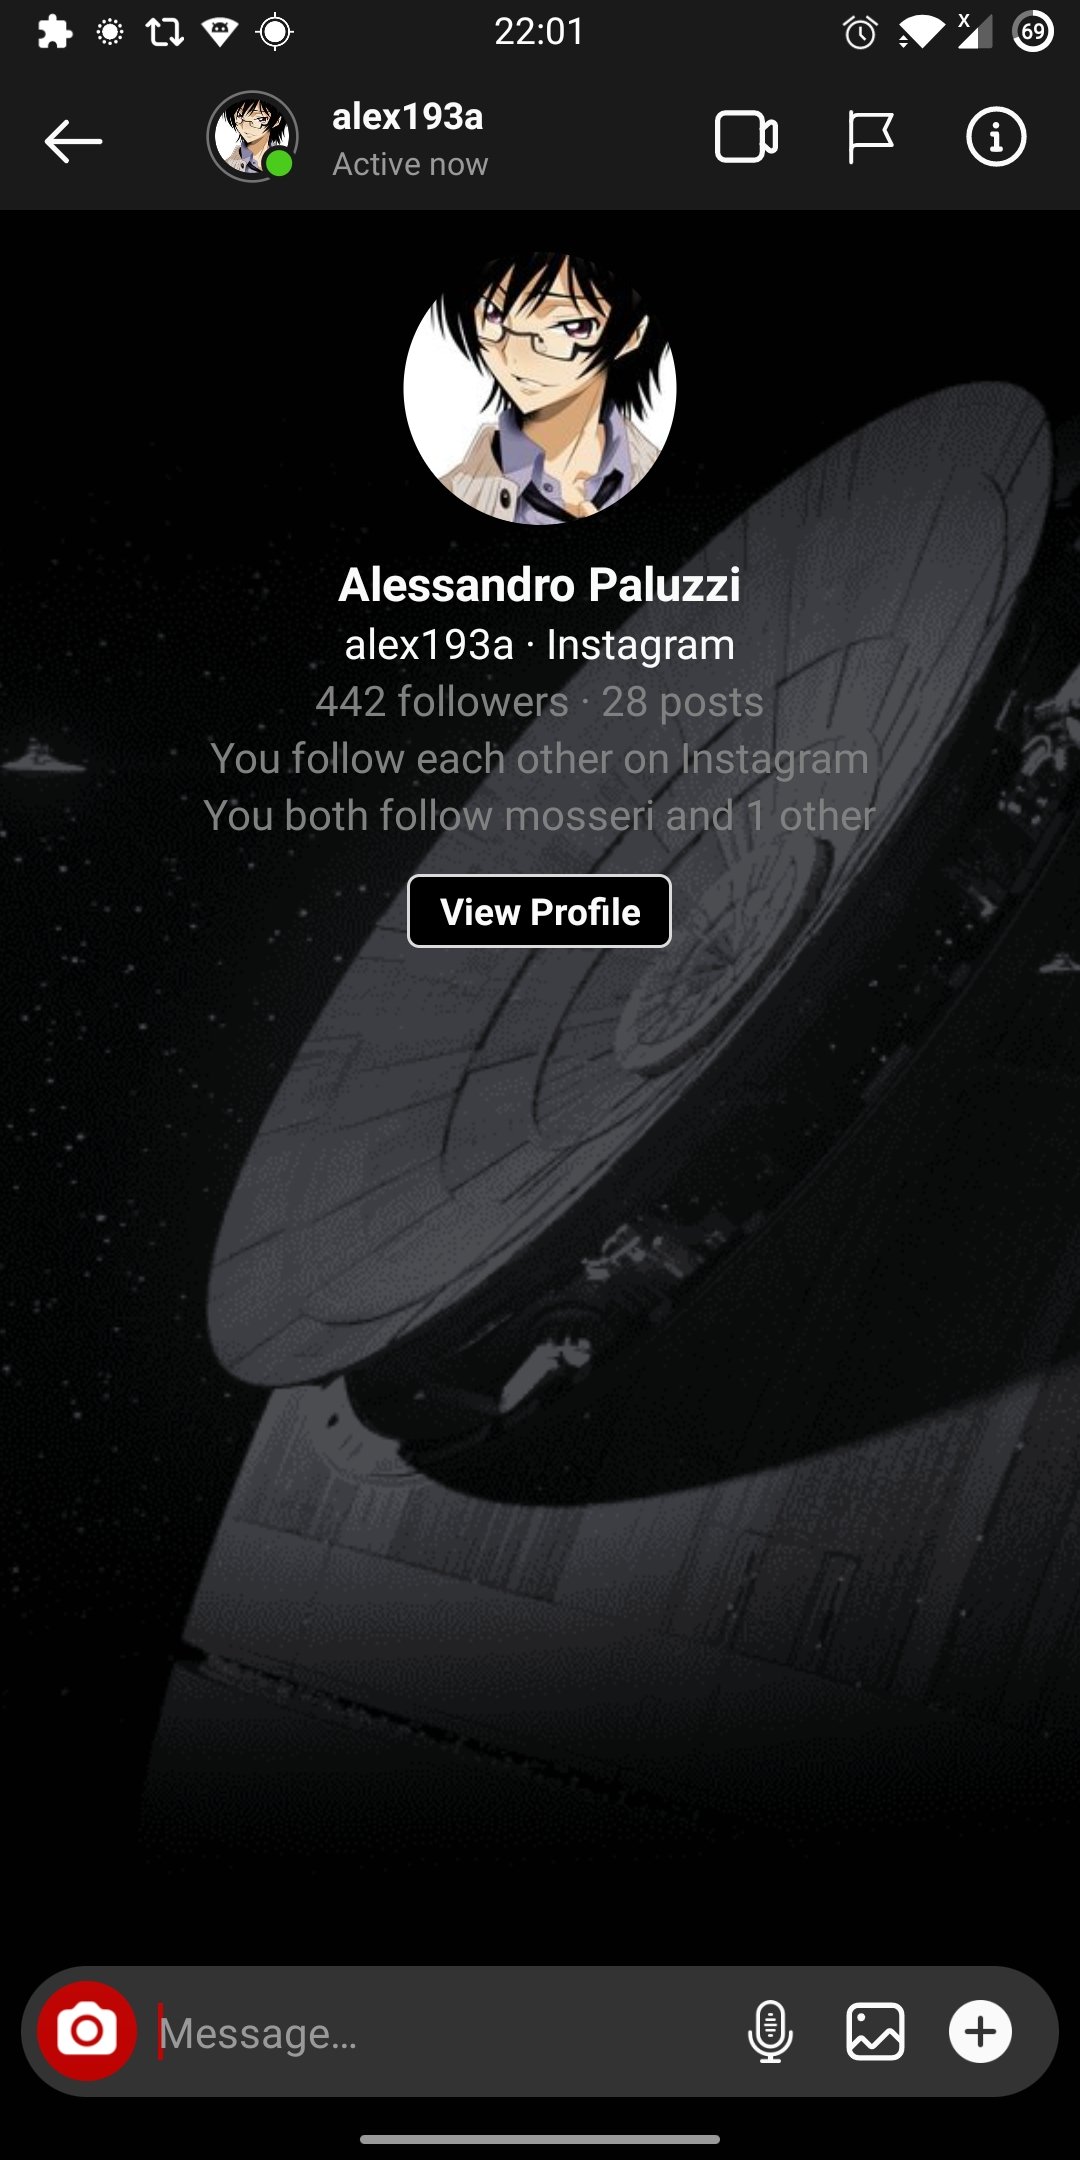 Twitter 上的alessandro Paluzzi Instagram Is Working On A New Chat Theme Star Wars T Co Bvenjc8z3t Twitter